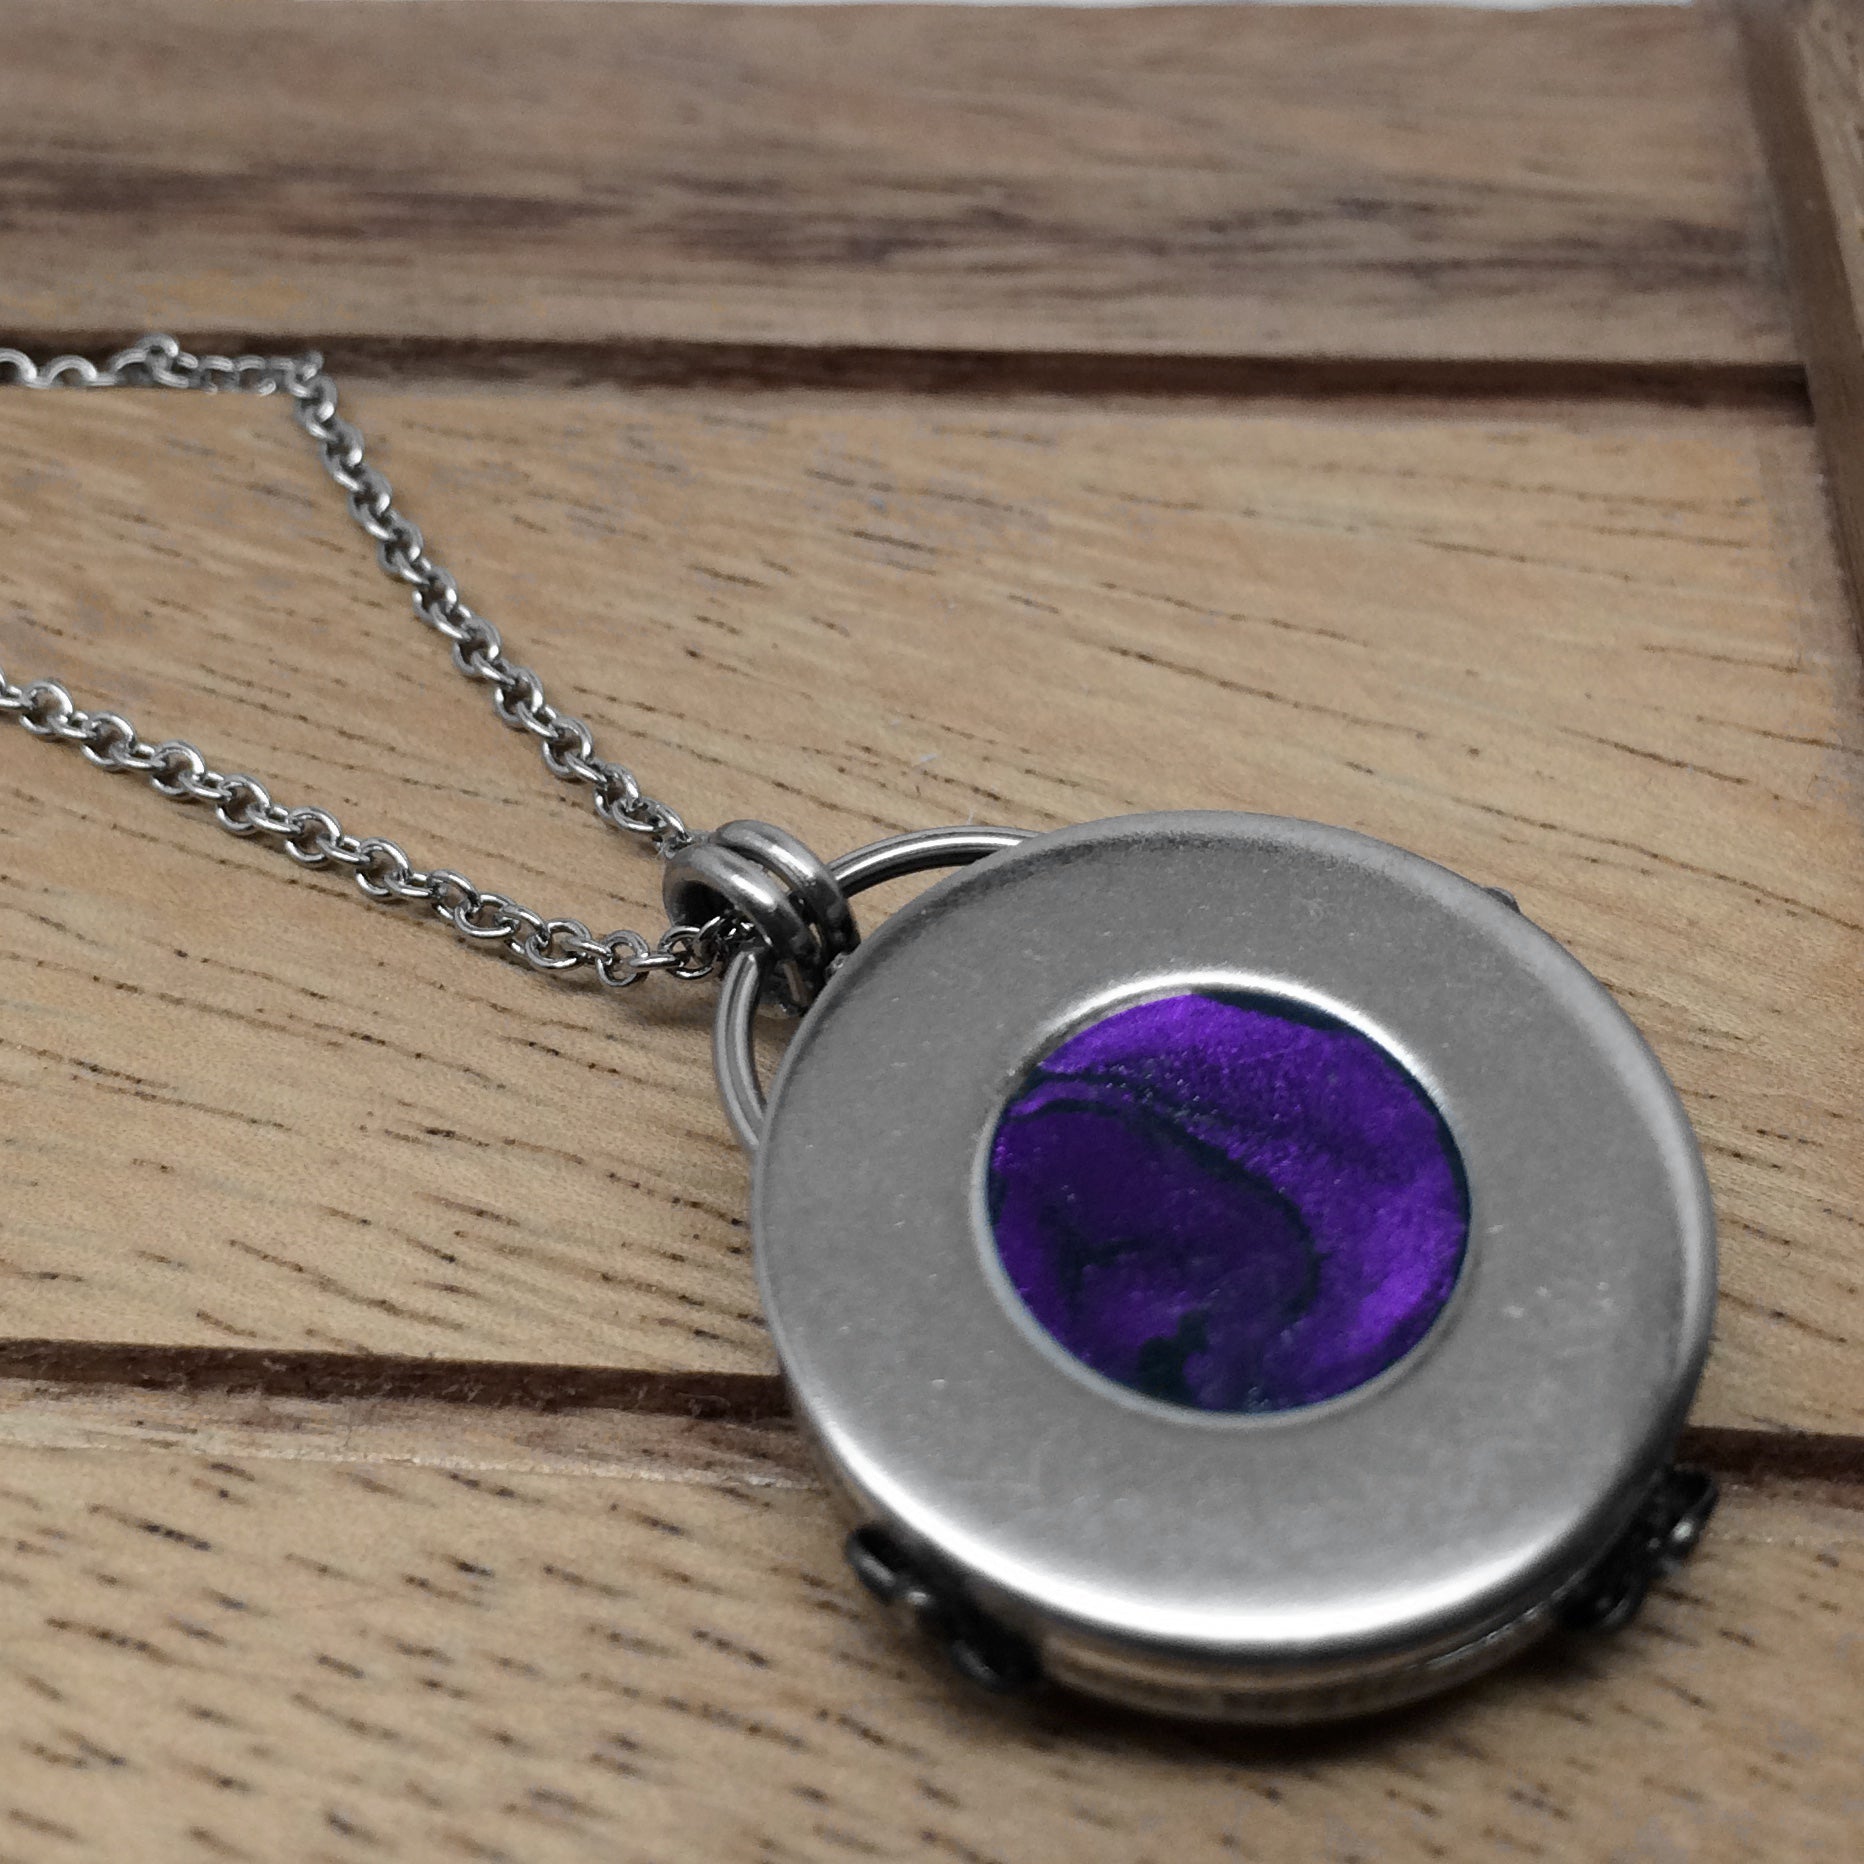 Pendant Necklaces The Vampire Diaries Elena Locket Necklace S925 Sliver  Vervain Jewelry For Women Gift Birthday Present Gir1 From Blancnoir, $71.01  | DHgate.Com